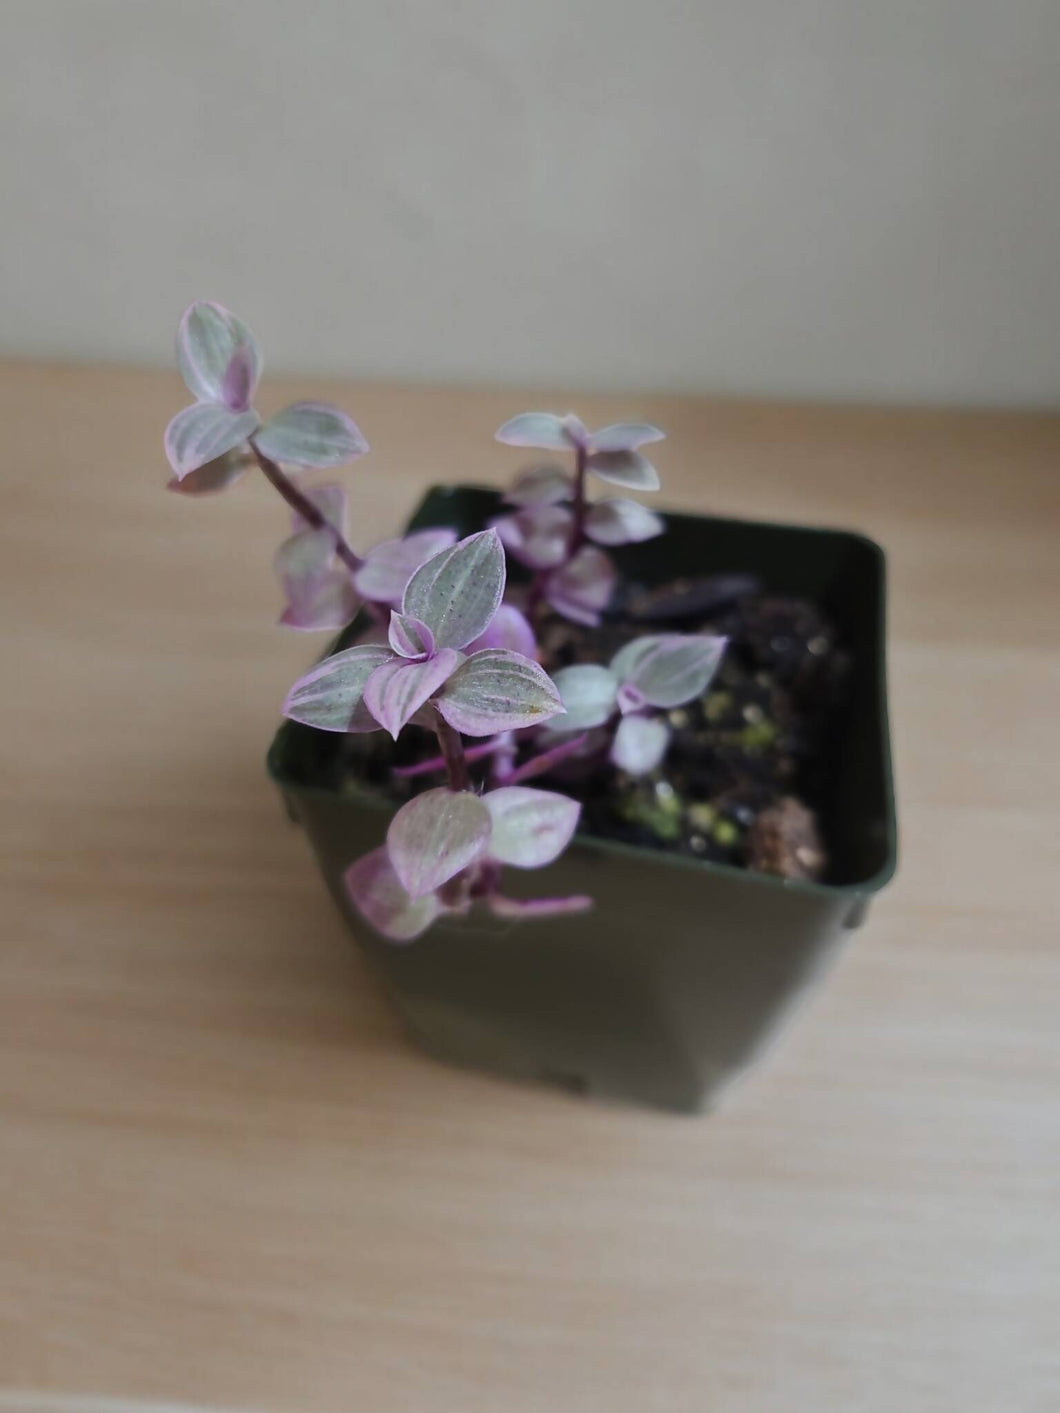 Calissia rapens 'Pink Panther' 2.5